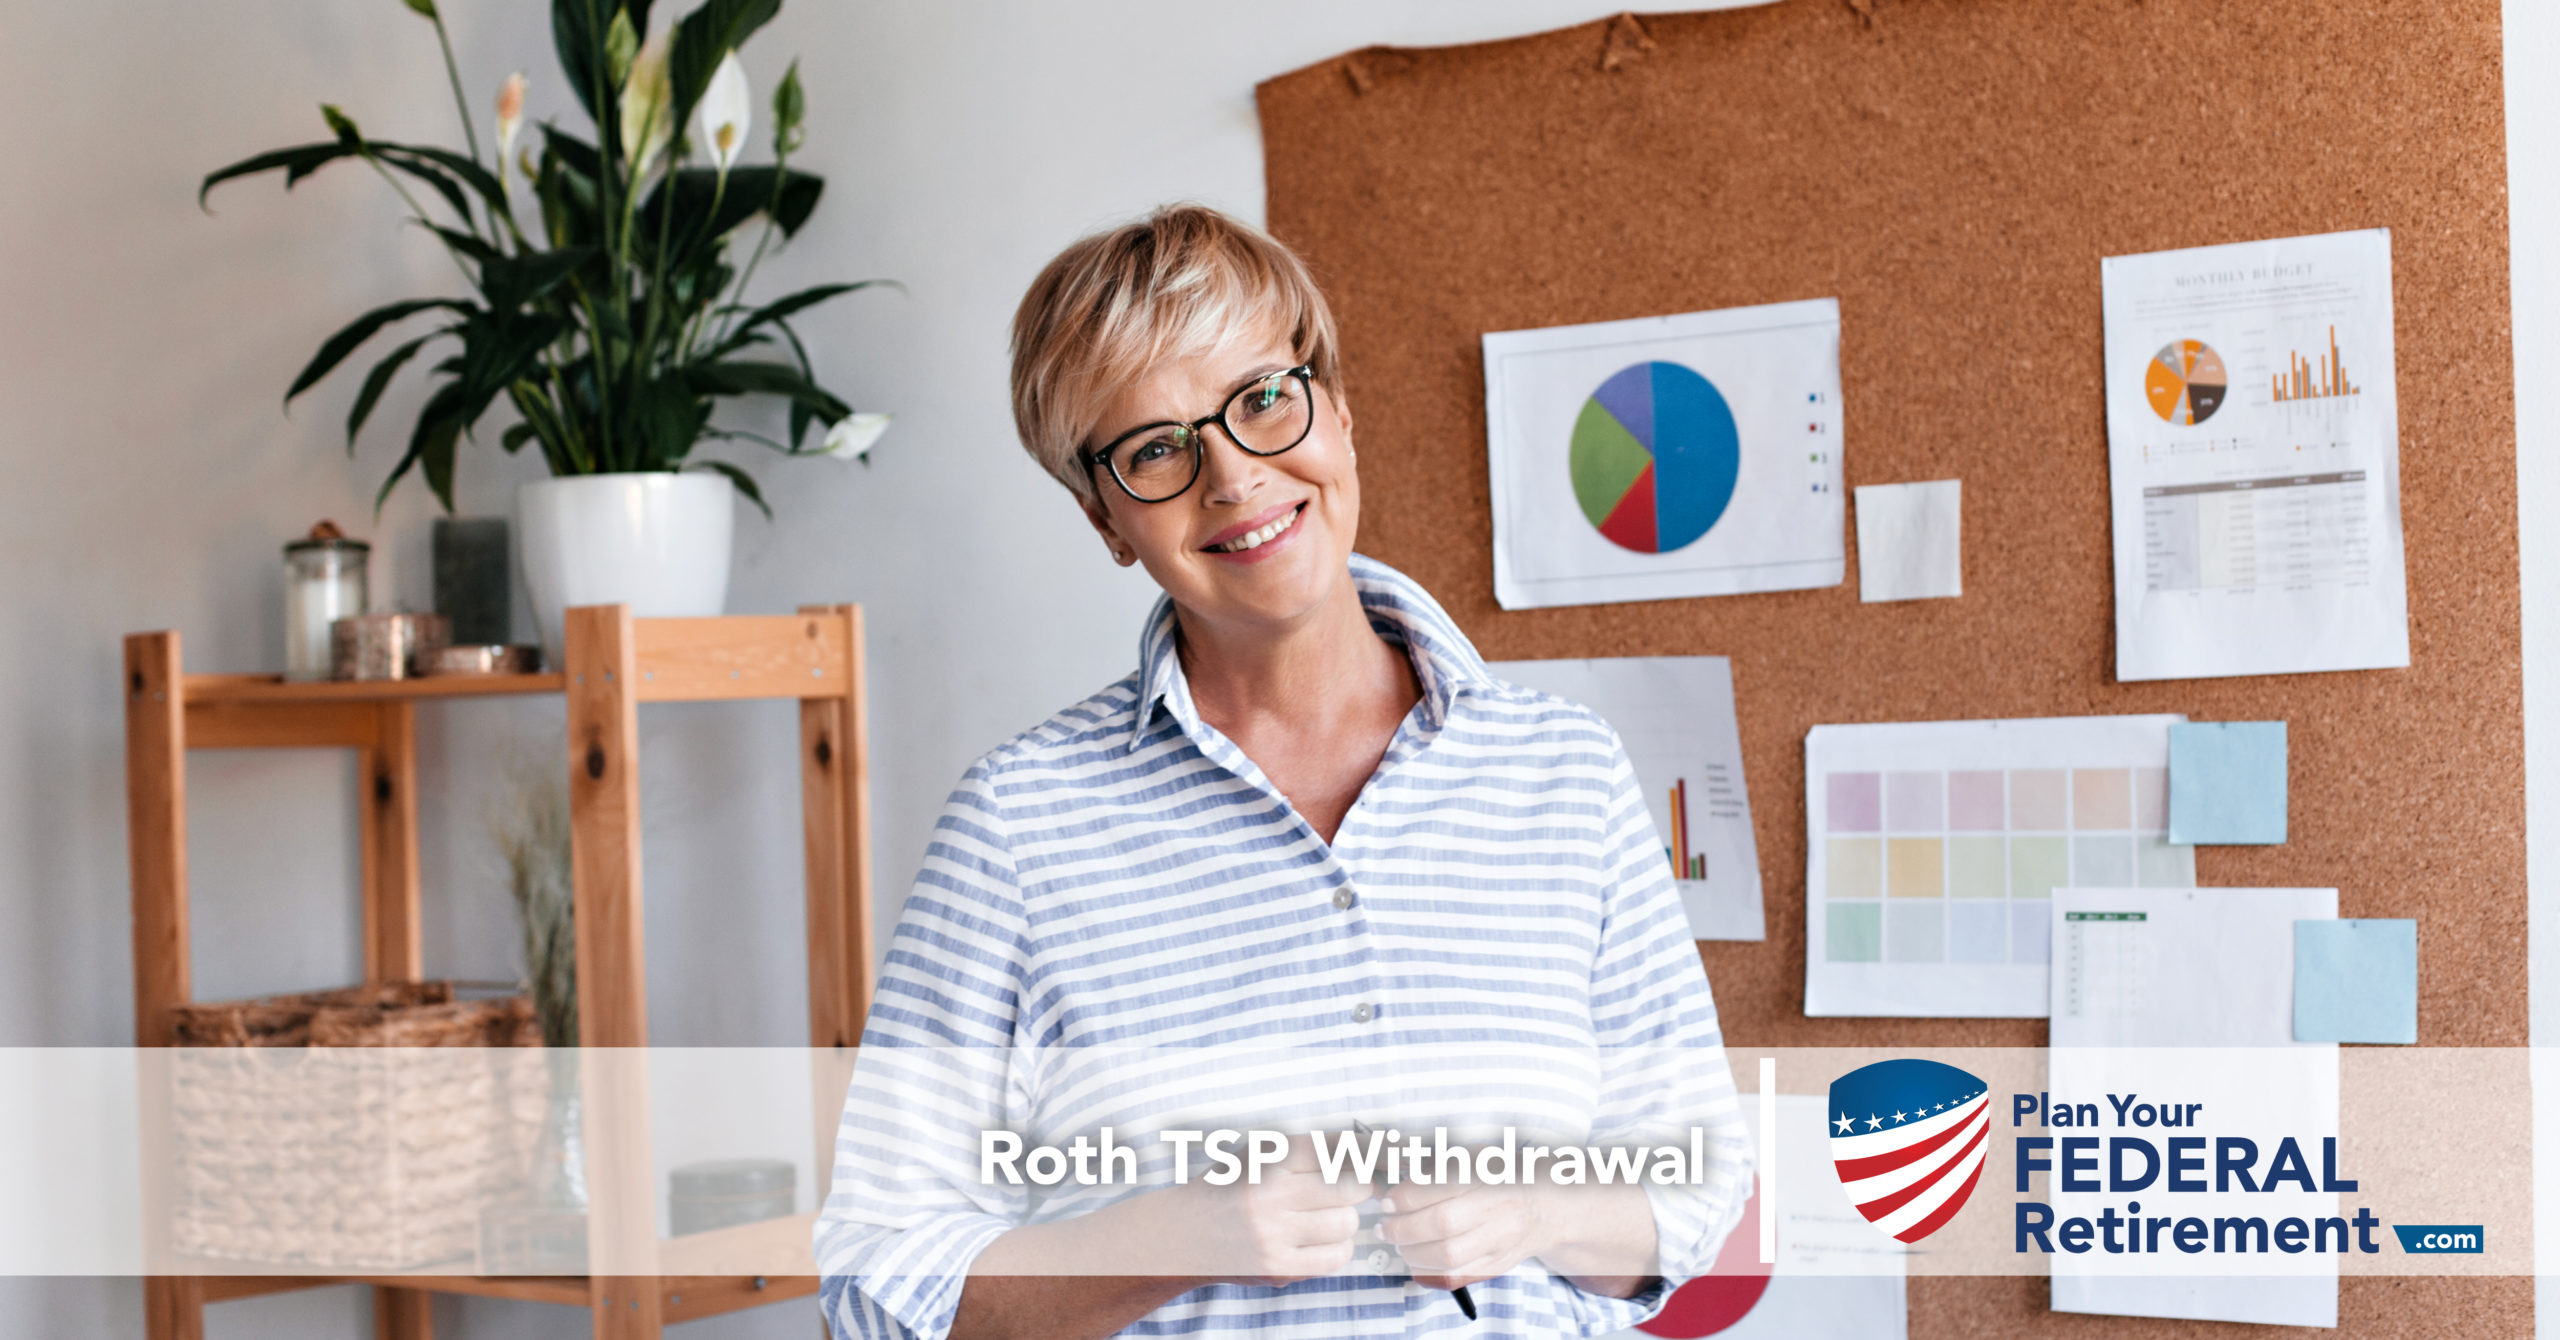 Are you confused about Roth TSP rules? Plan Your Federal Retirement